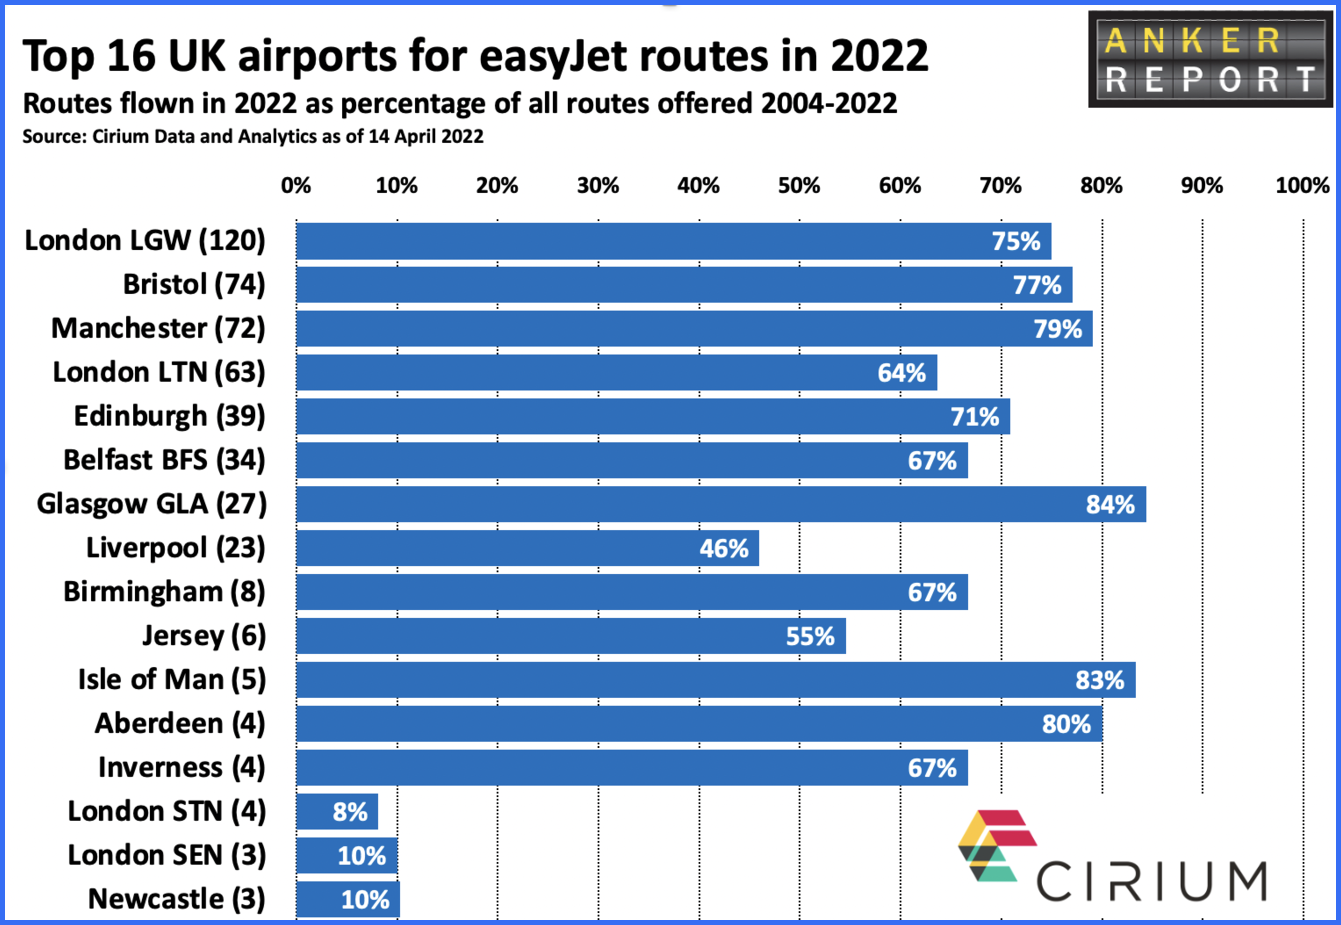 Top 16 airports for easyJet routes 2022